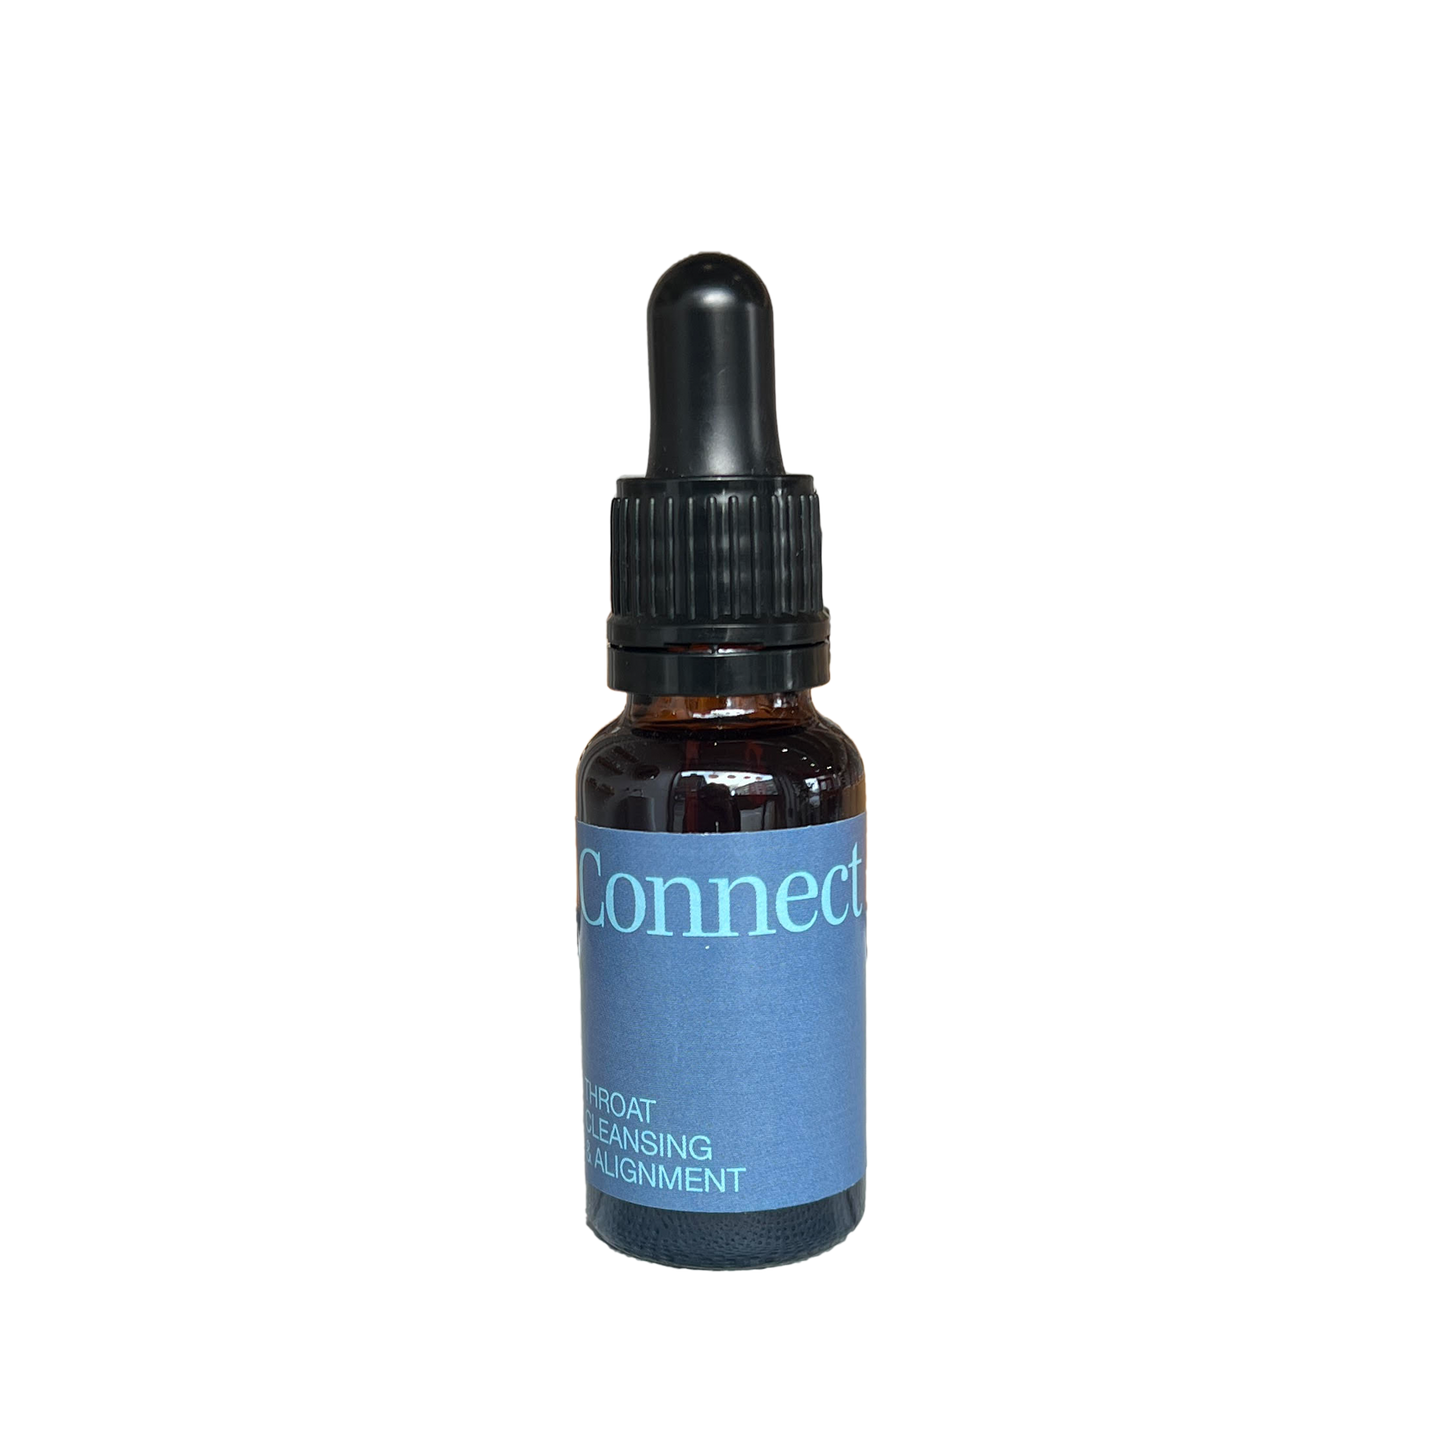 Connect - Throat Cleansing & Alignment 20ml